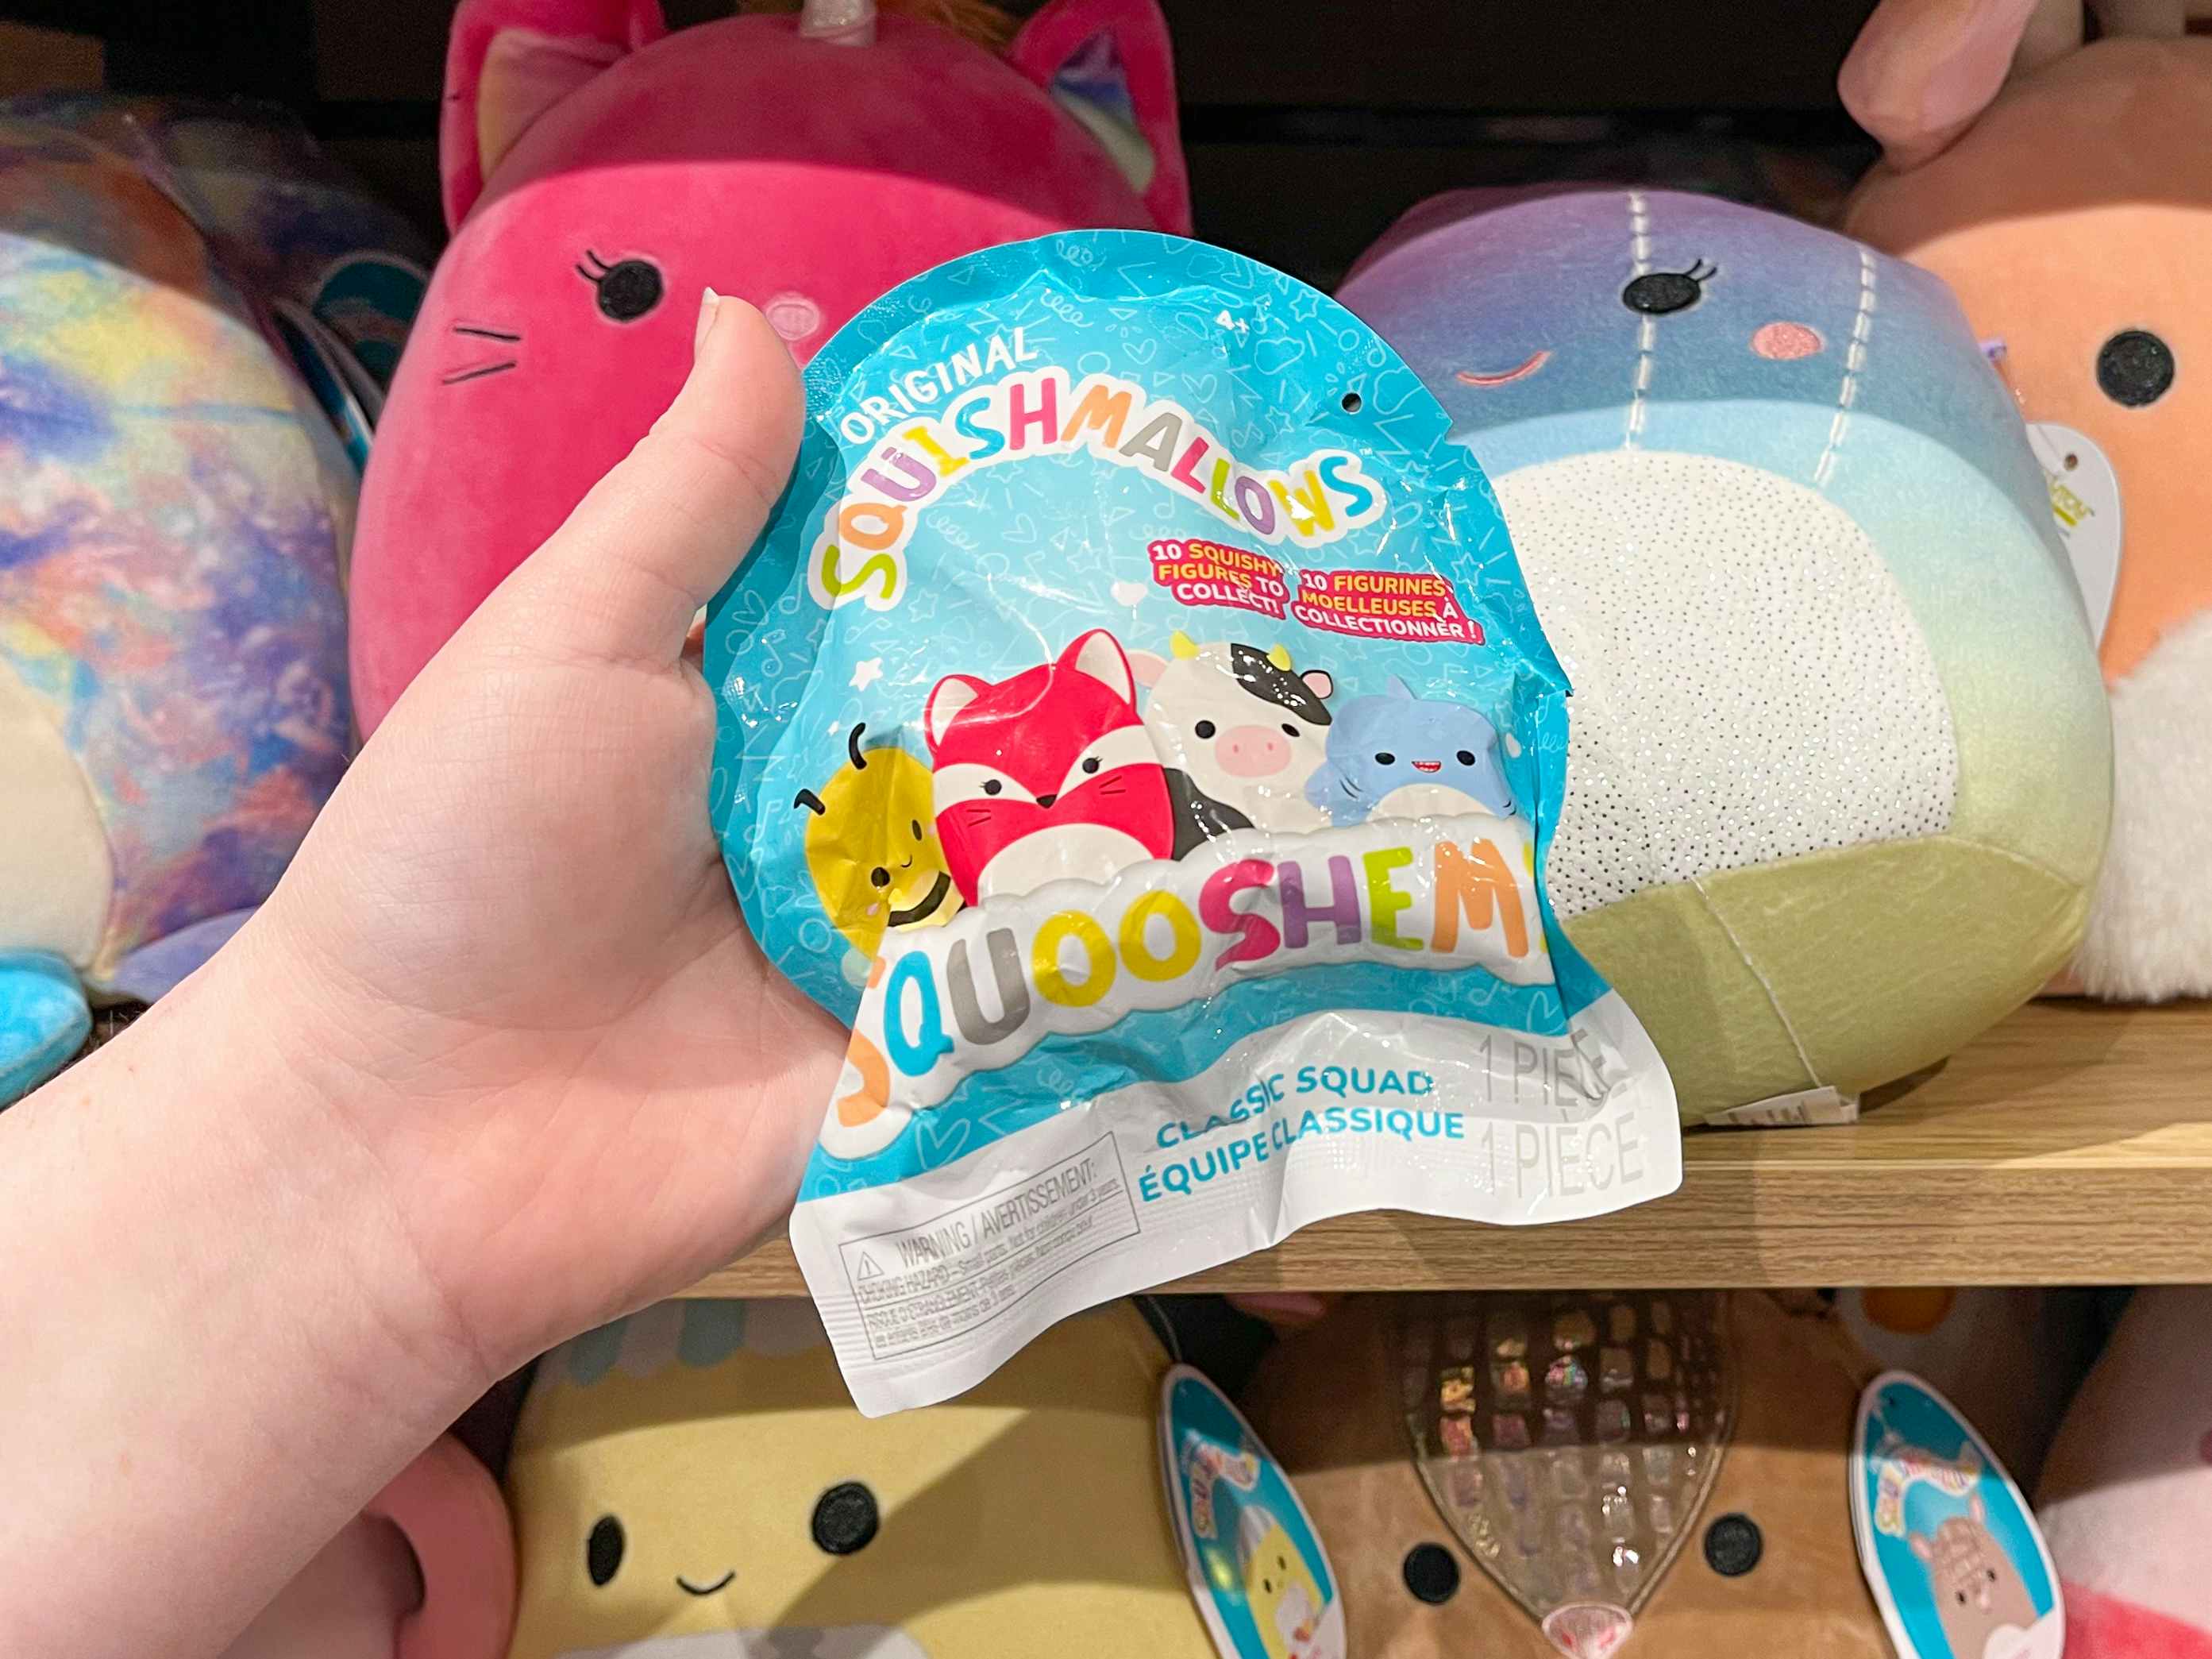 A person's hand holding up a Squishmallows Squooshem mystery blind bag